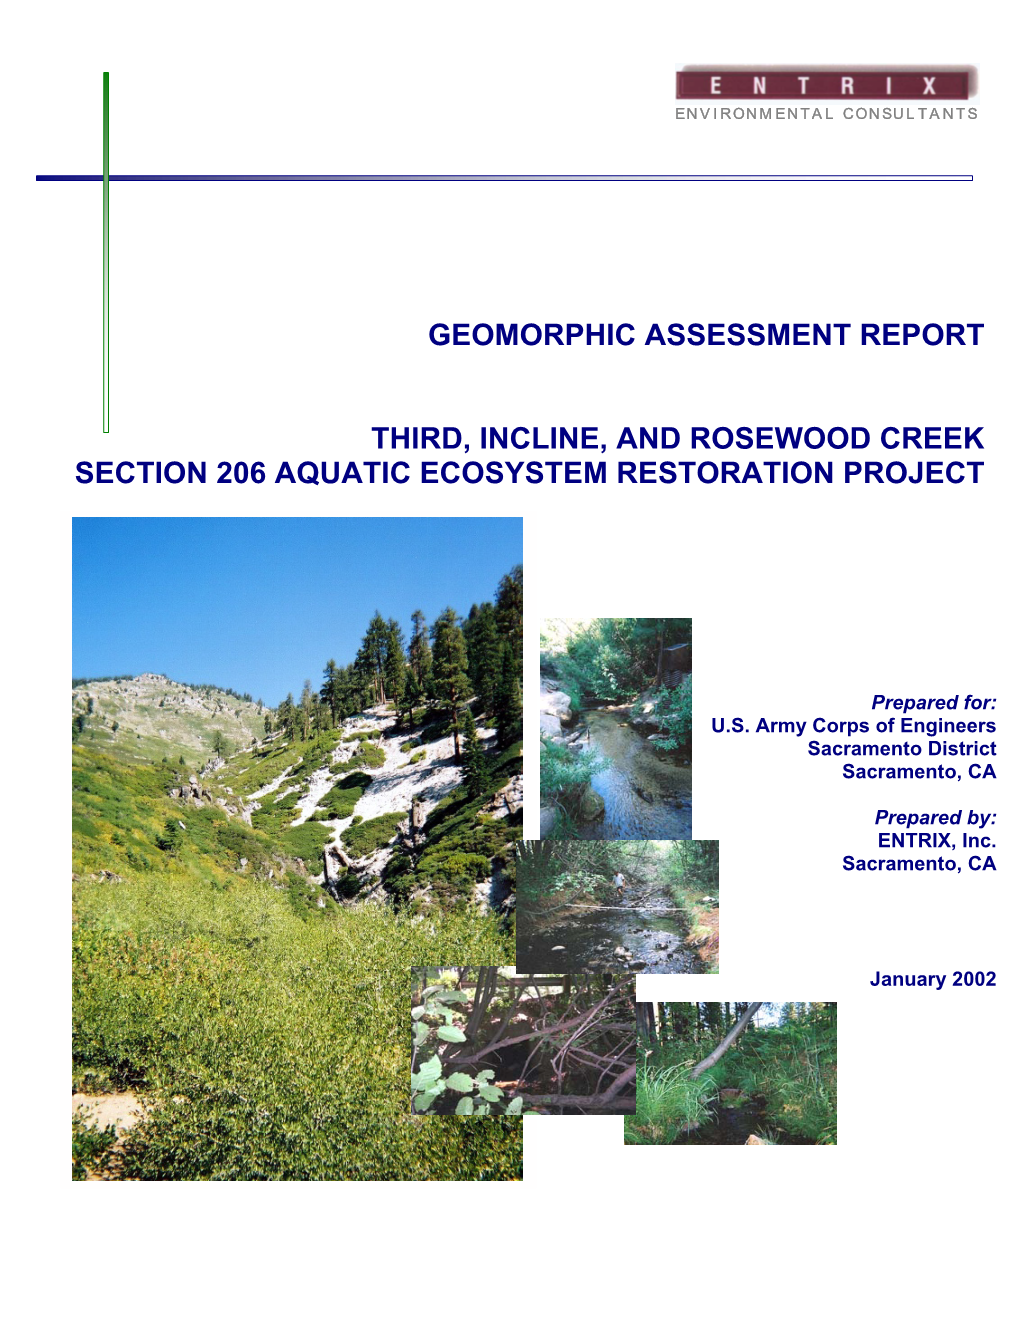 Third, Incline, and Rosewood Creek Section 206 Aquatic Ecosystem Restoration Project